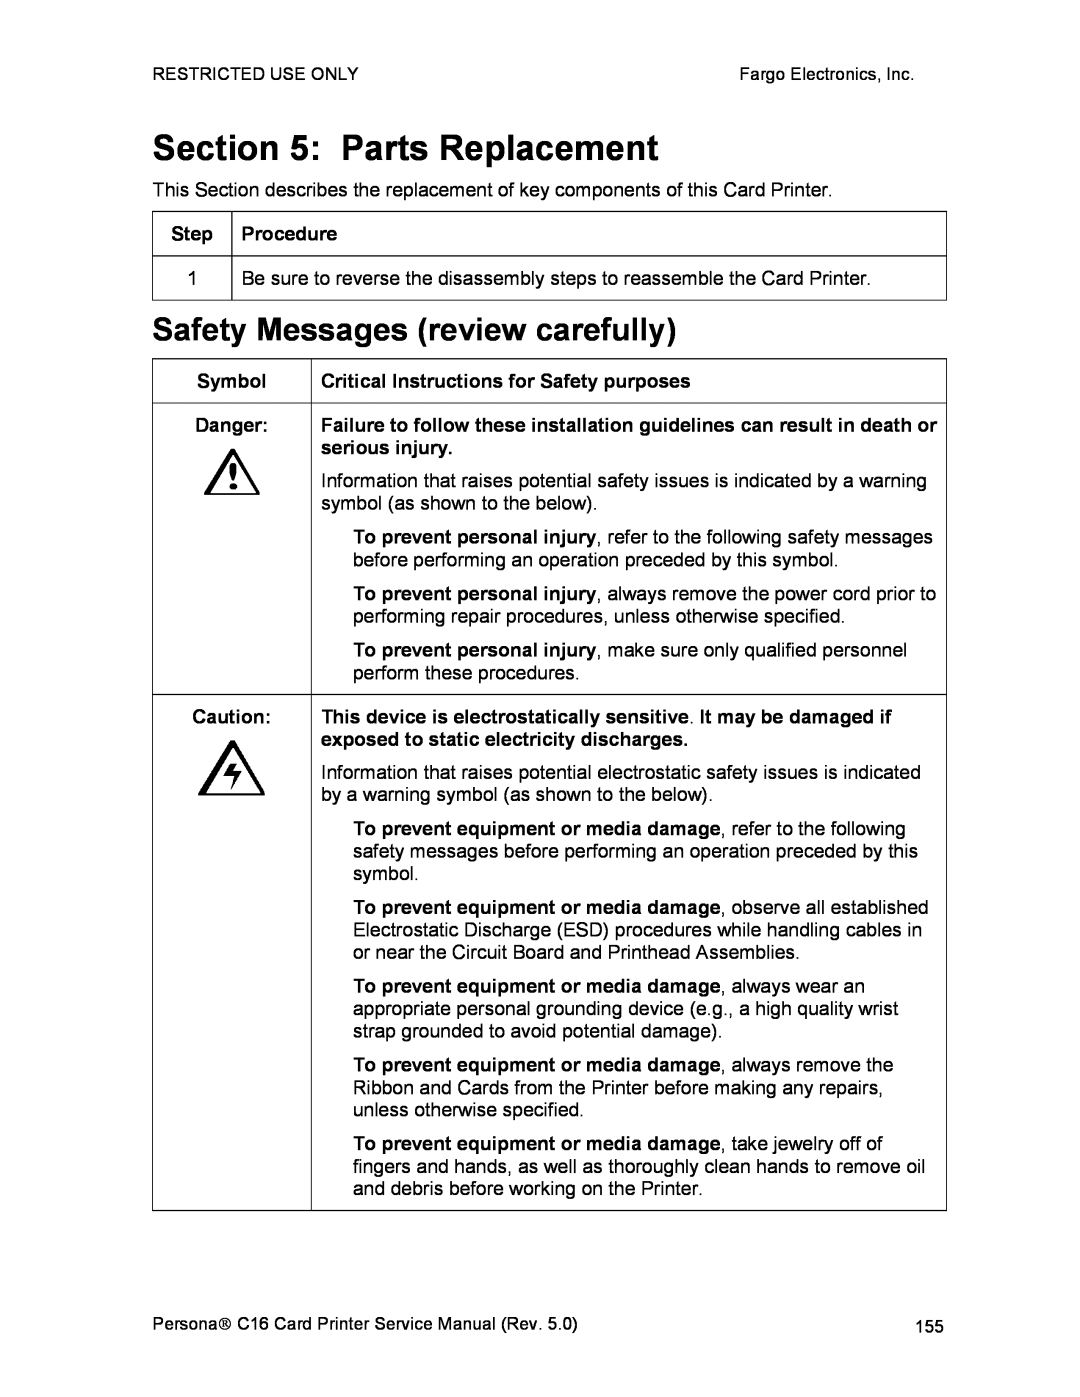 FARGO electronic C16 service manual Parts Replacement, Safety Messages review carefully 